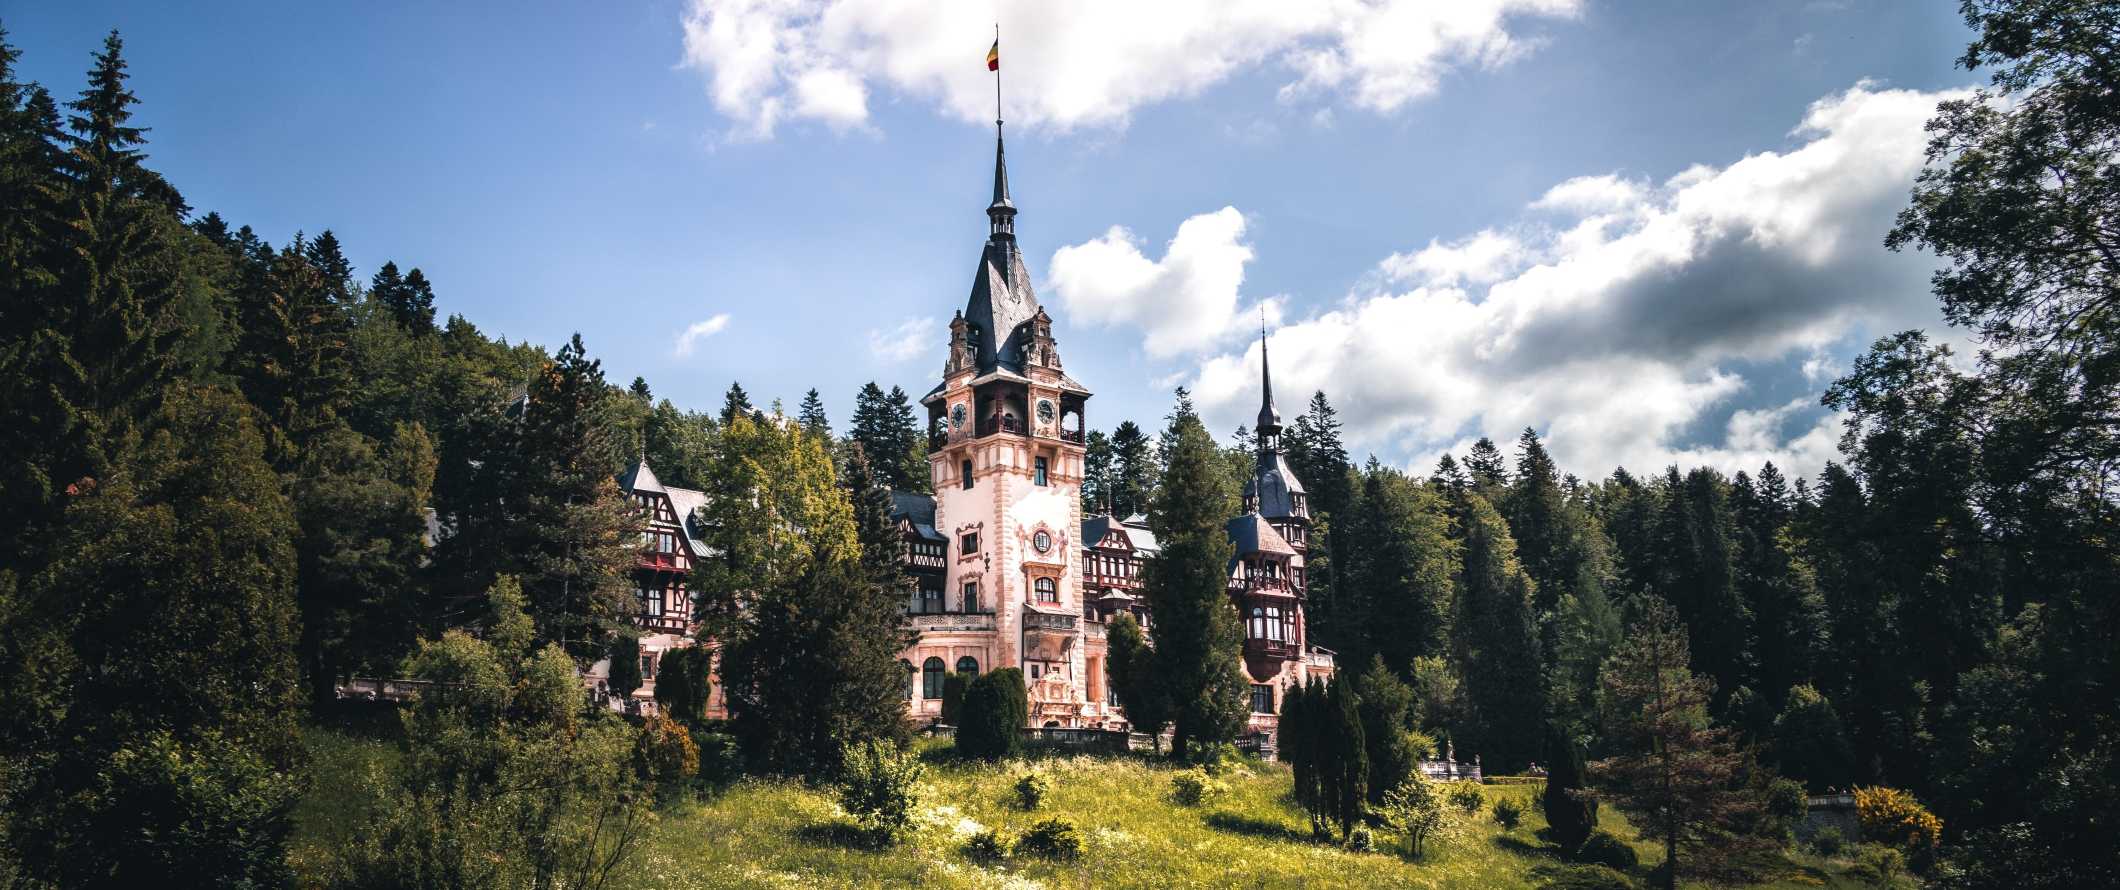 The fairytale-esque Peles Castle, surrounded by trees, in Romania.